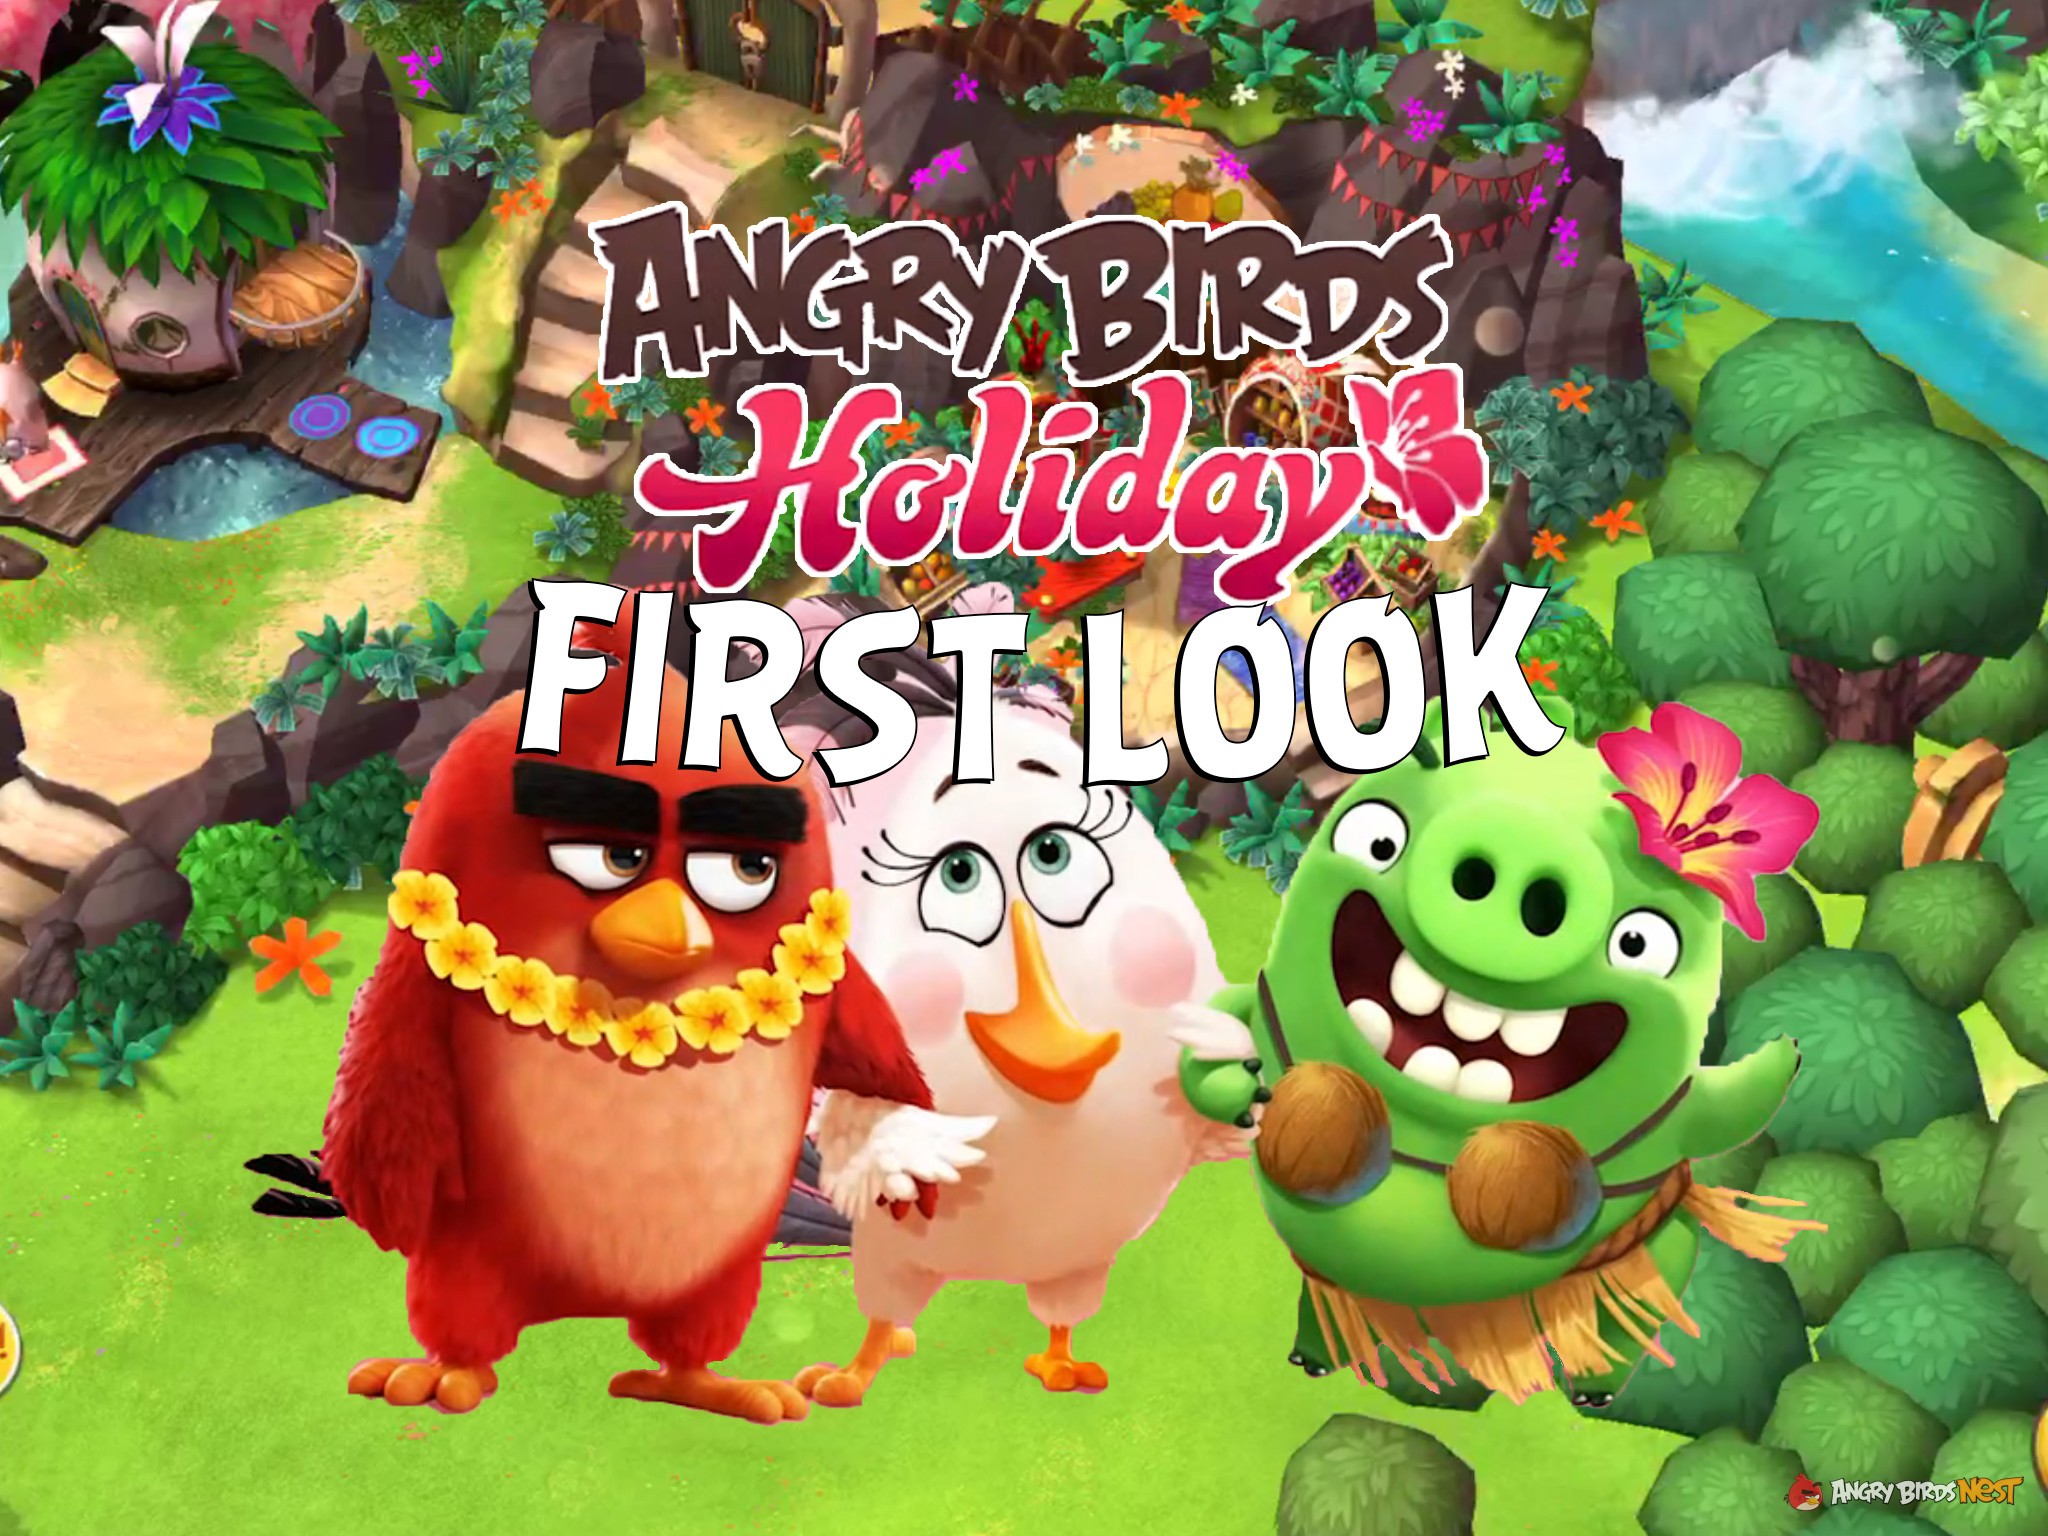 Angry Birds Epic: can Rovio's feathery franchise really work as an